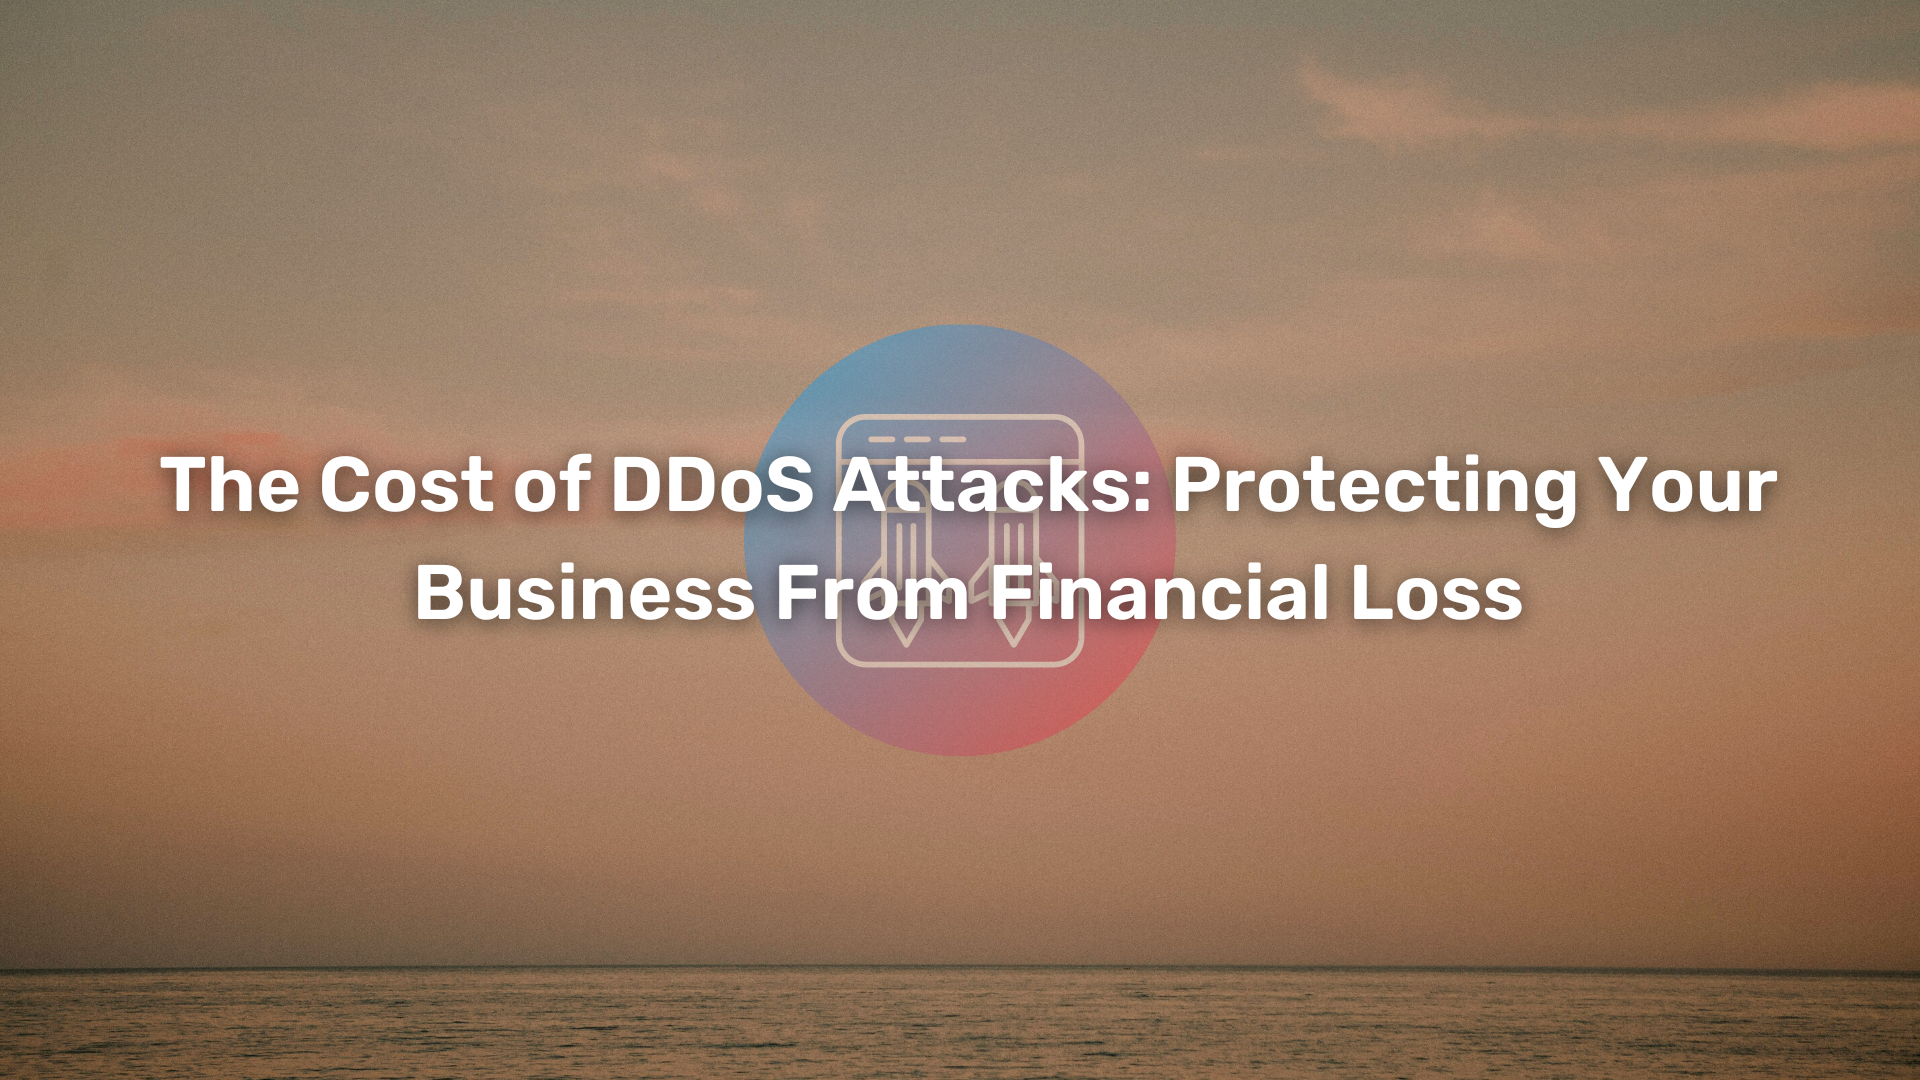 The Cost of DDoS Attacks Protecting Your Business From Financial Loss